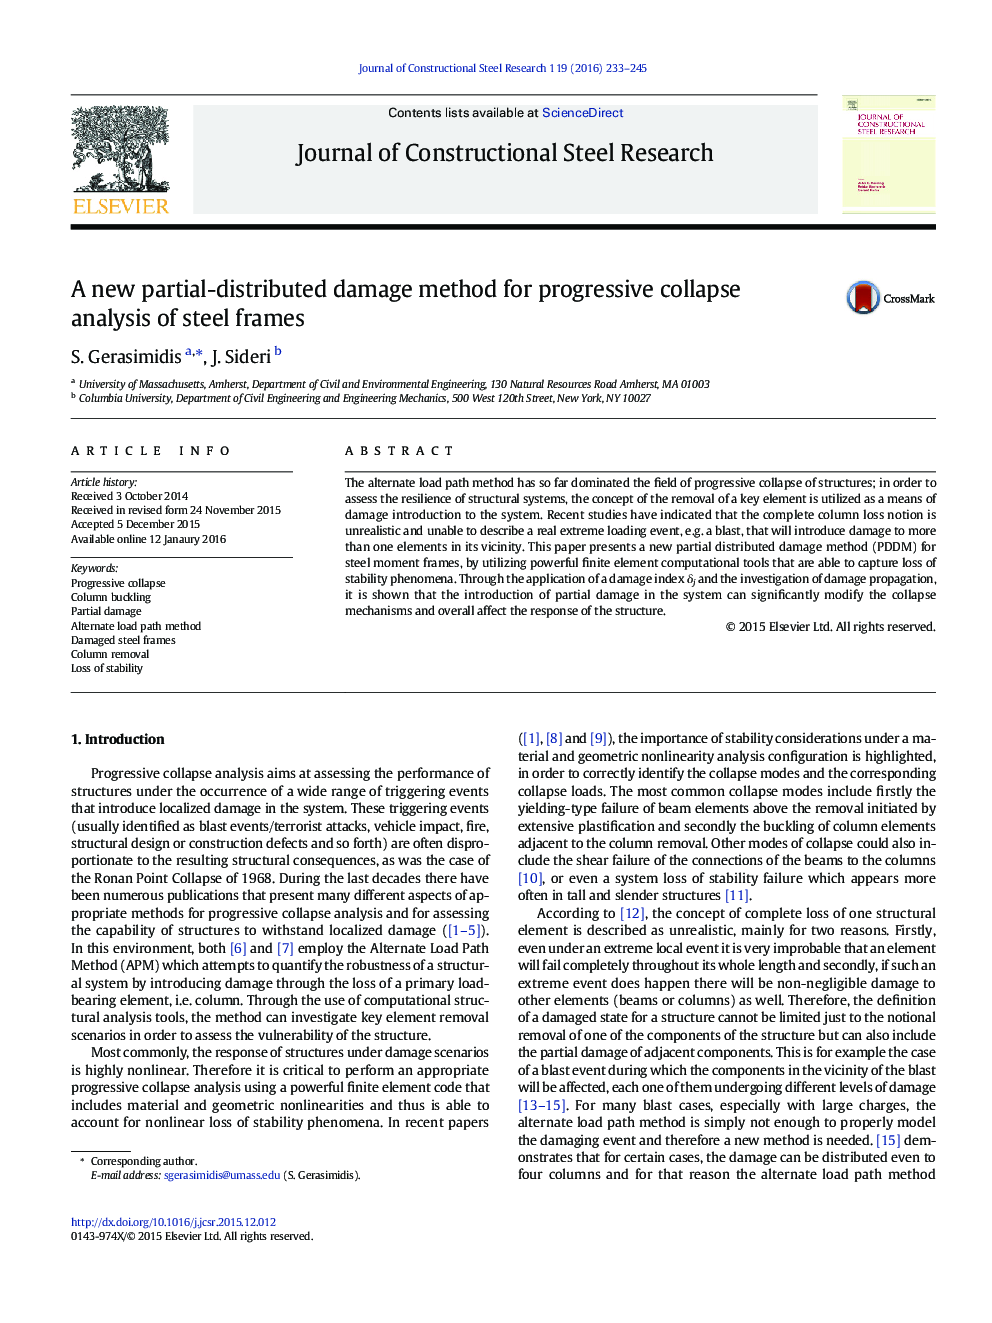 A new partial-distributed damage method for progressive collapse analysis of steel frames